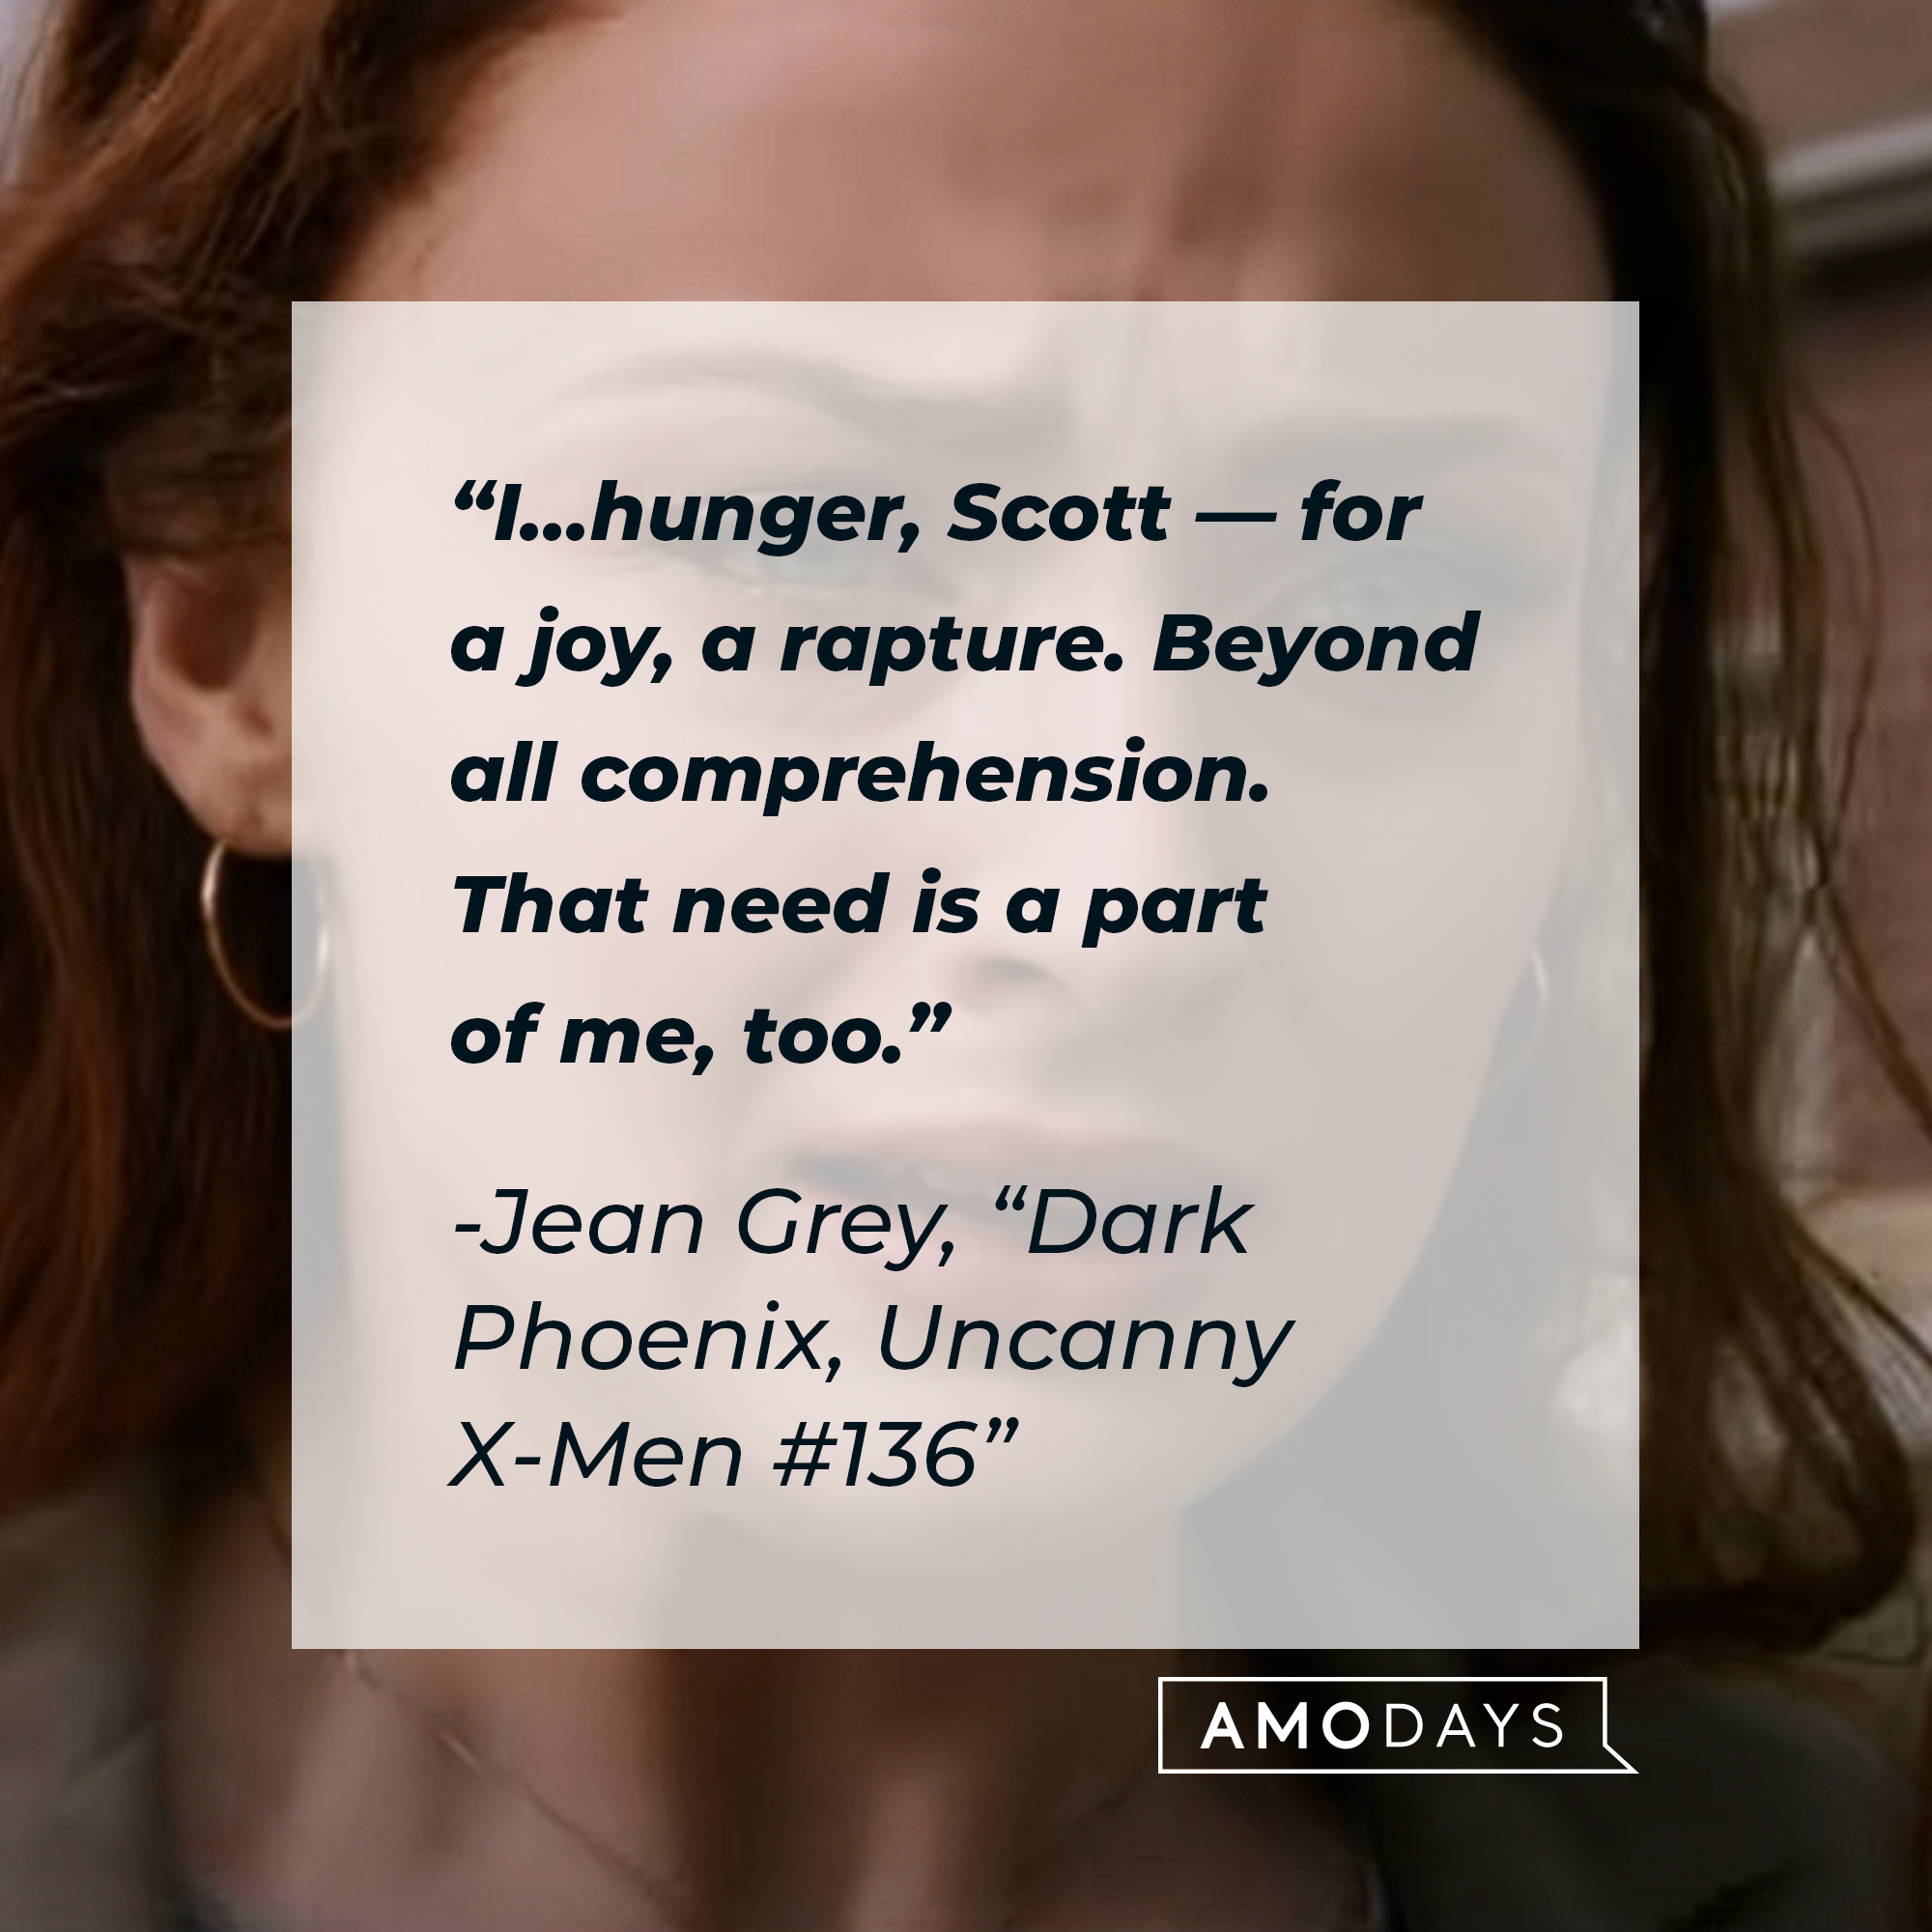 Jean Grey’s quote: "I…hunger, Scott — for a joy, a rapture. Beyond all comprehension. That need is a part of me, too." | Image: Youtube.com/20thCenturyStudios